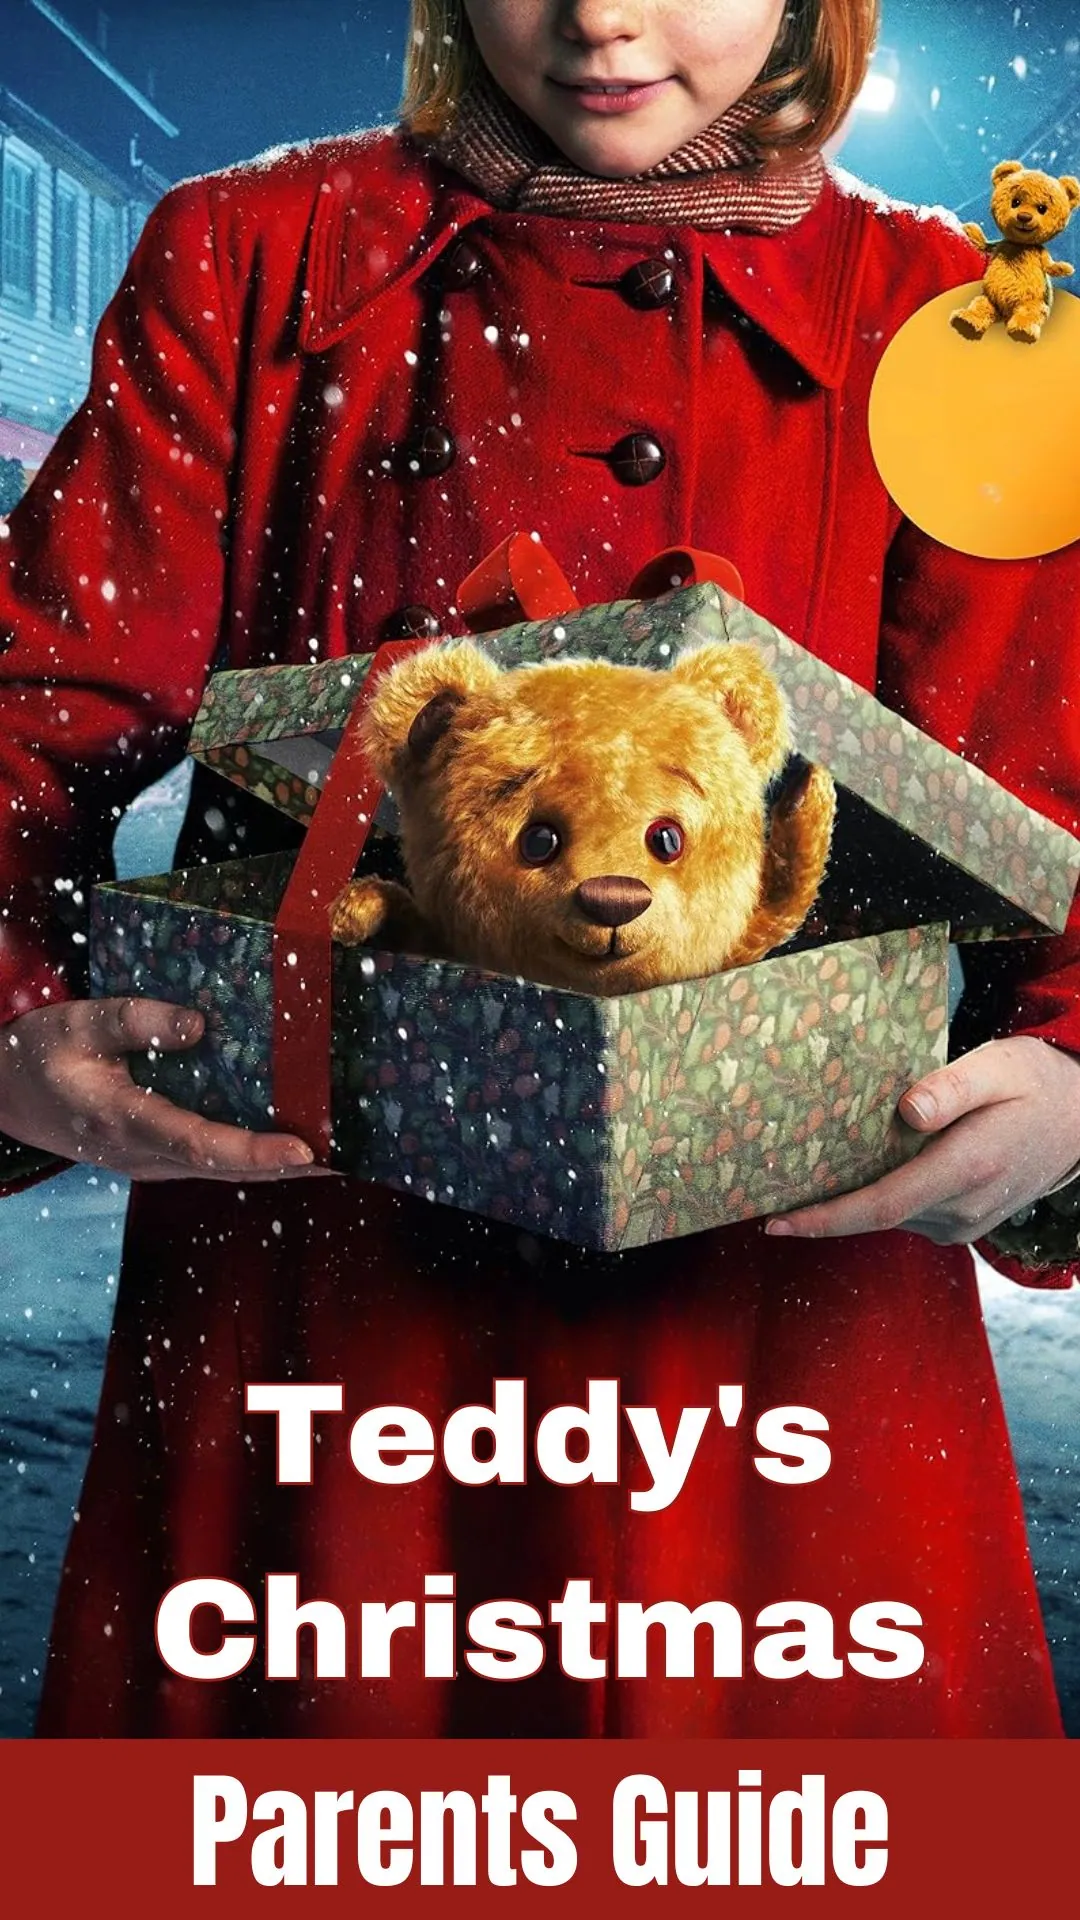 Teddy's Christmas Parents Guide (4)